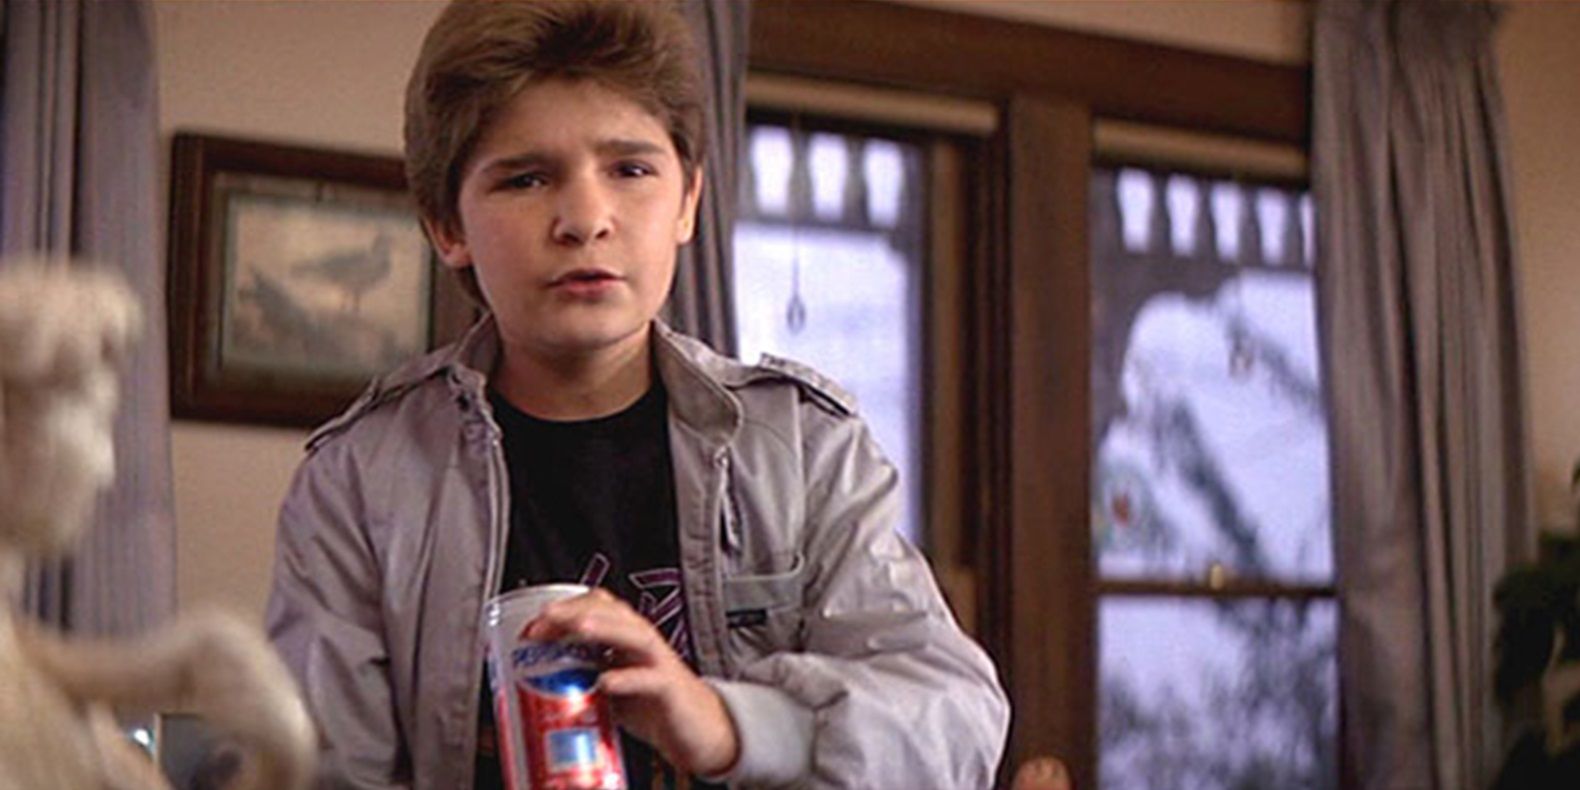 Mouth drinking soda in The Goonies